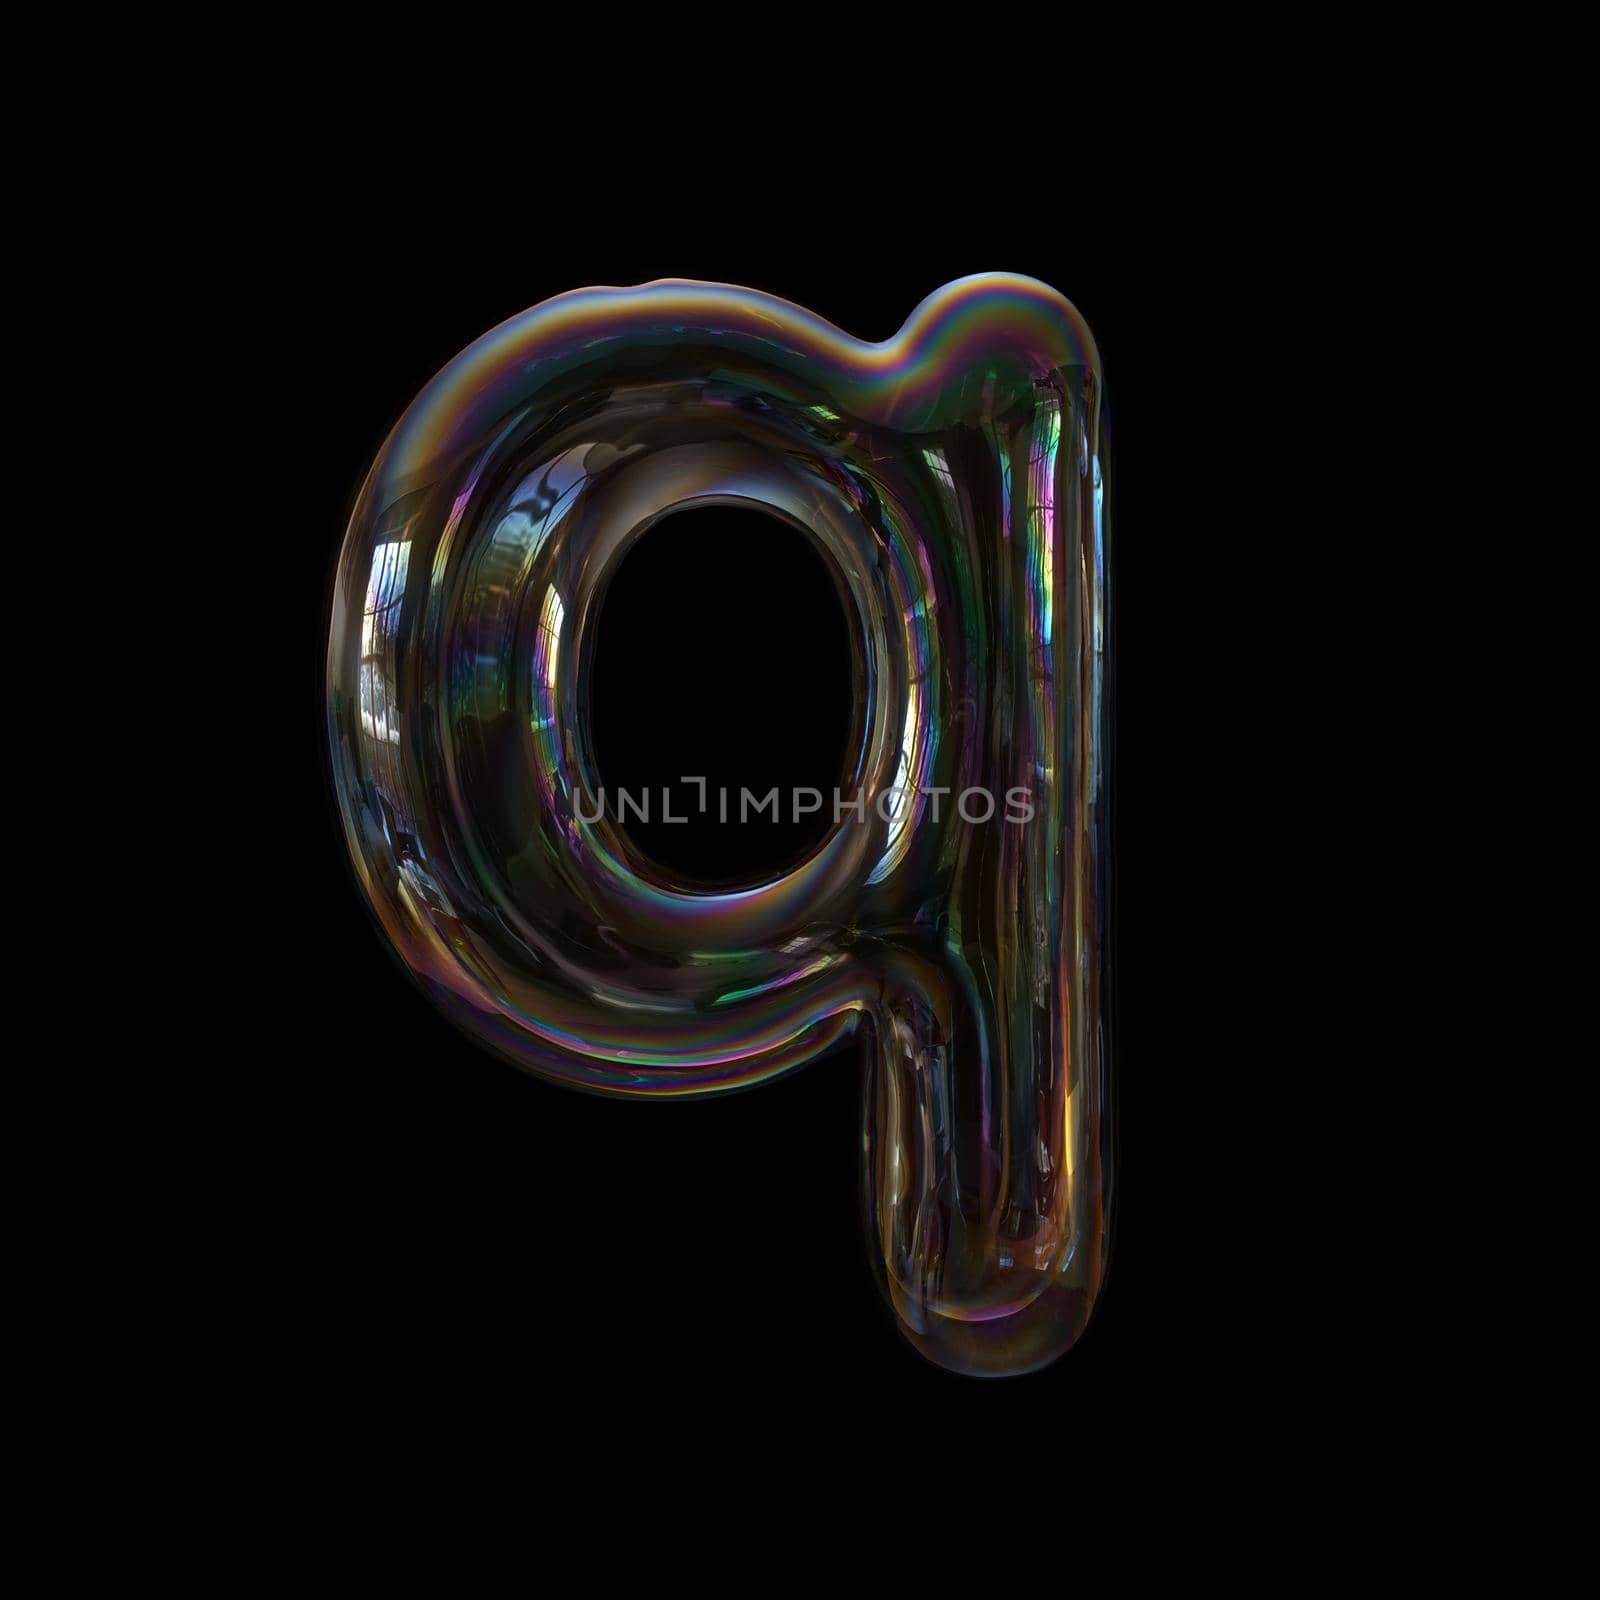 soap bubble alphabet font Q - Lower-case 3d letter isolated on a black background.
This 3d font collection is well-suited for various creative projects including but not limited to : Childhood. events. nature...